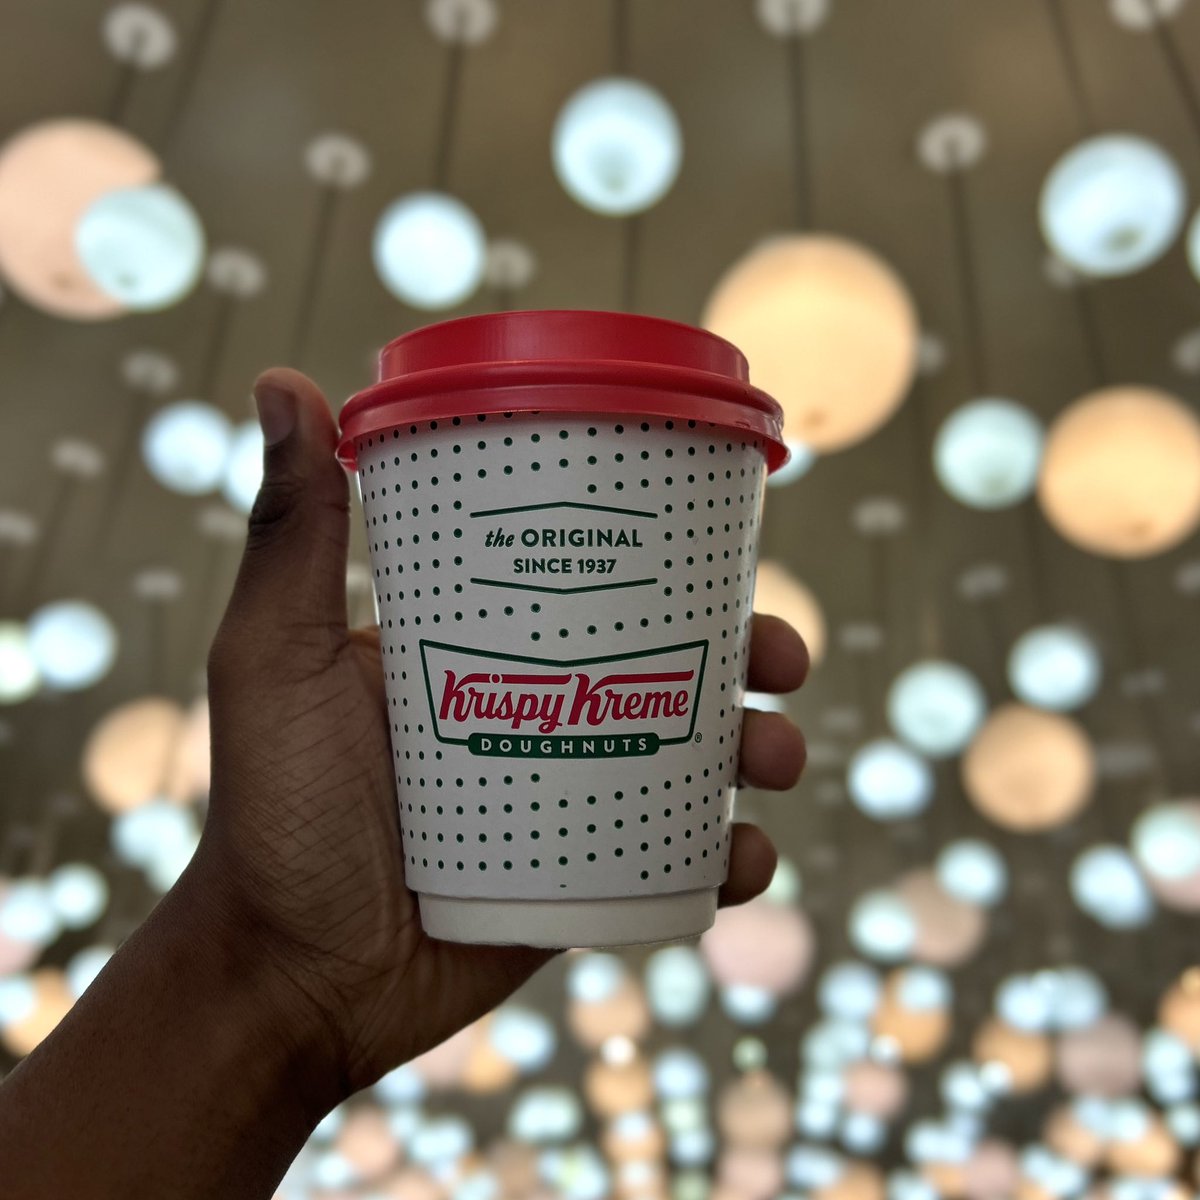 Brew up your Monday Magic!☕️✨

Grab a premium coffee or hot chocolate from R20! 🍩

Deal exclusive to KKSA App members.

While stocks last. Ts & Cs apply.

#KKSA #KKcoffee #DrinkKrispyKremeCoffee #AppRewards